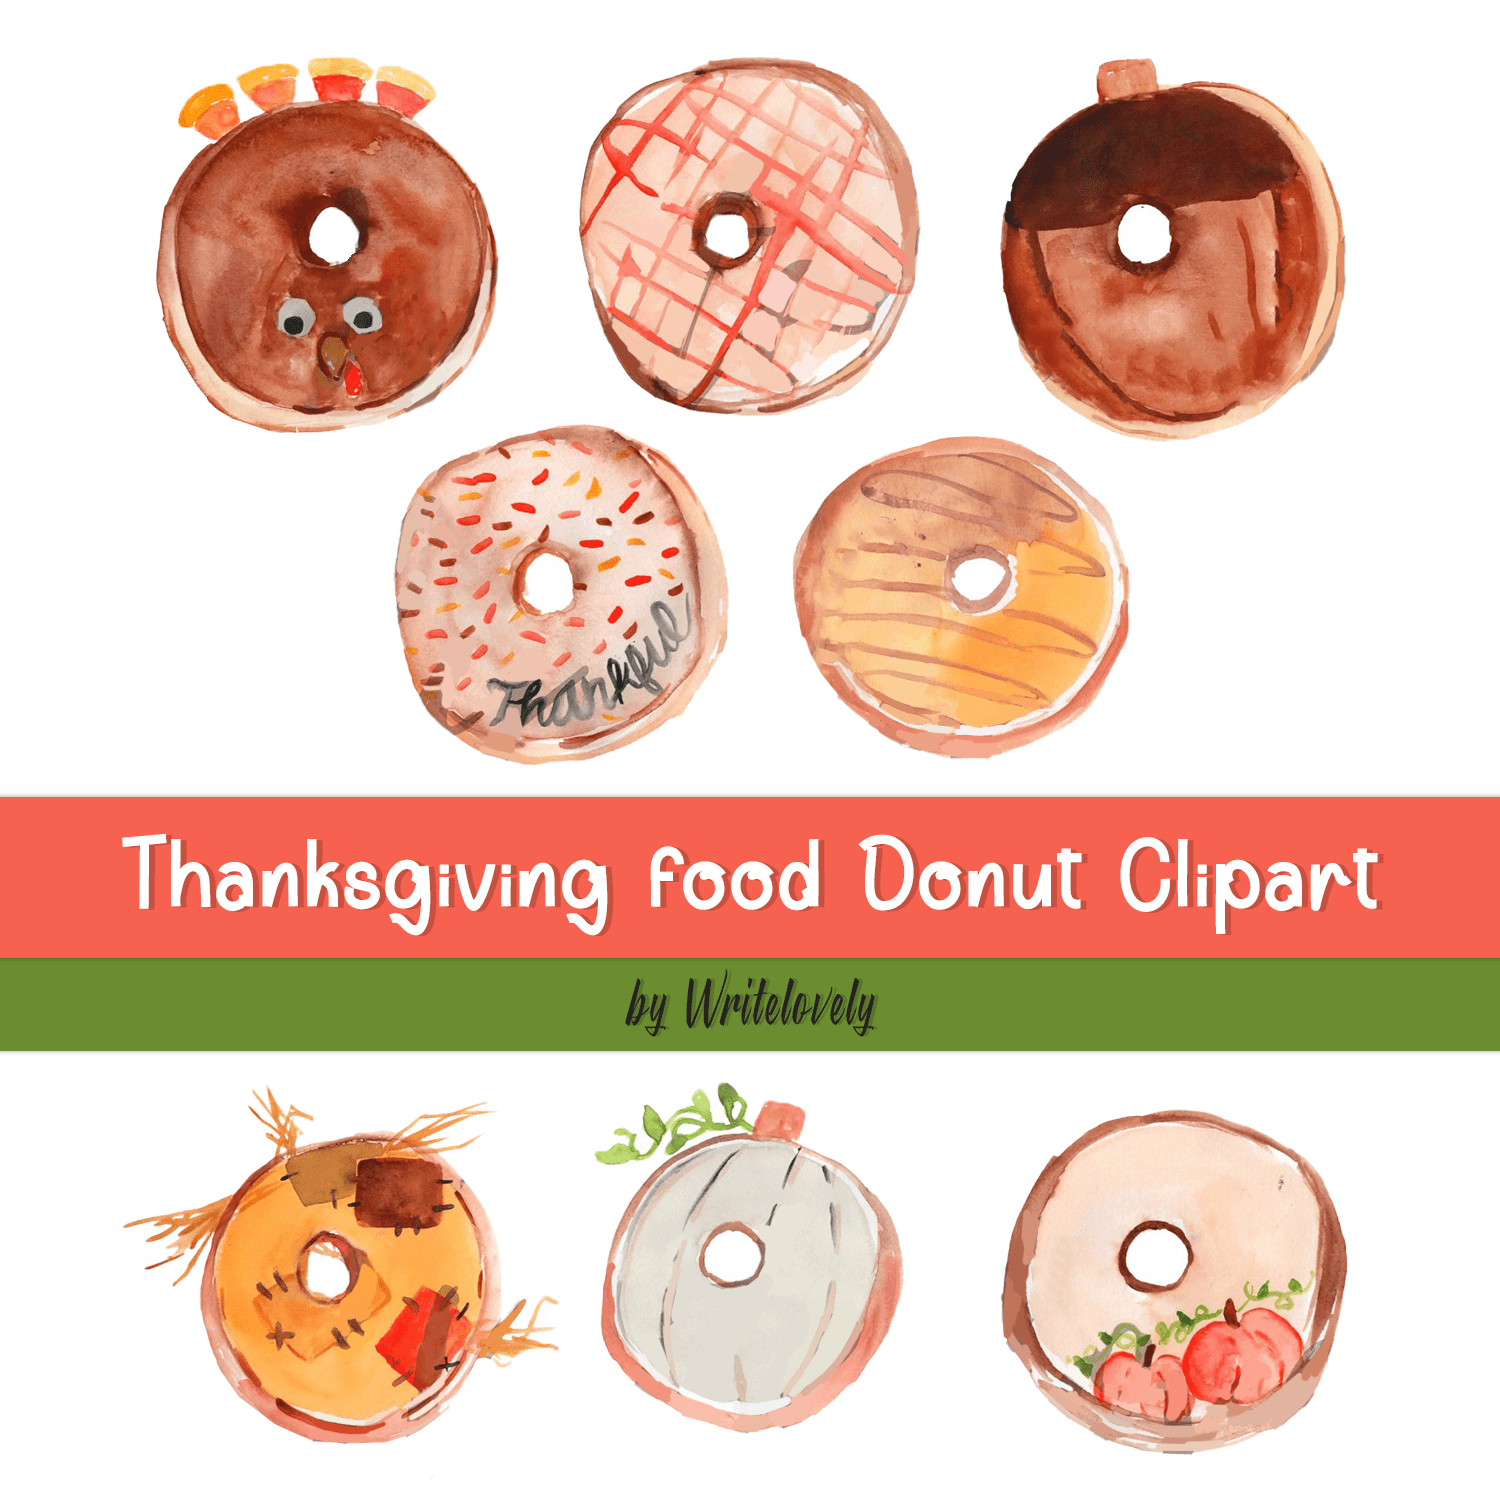 Thanksgiving food Donut Clipart cover.